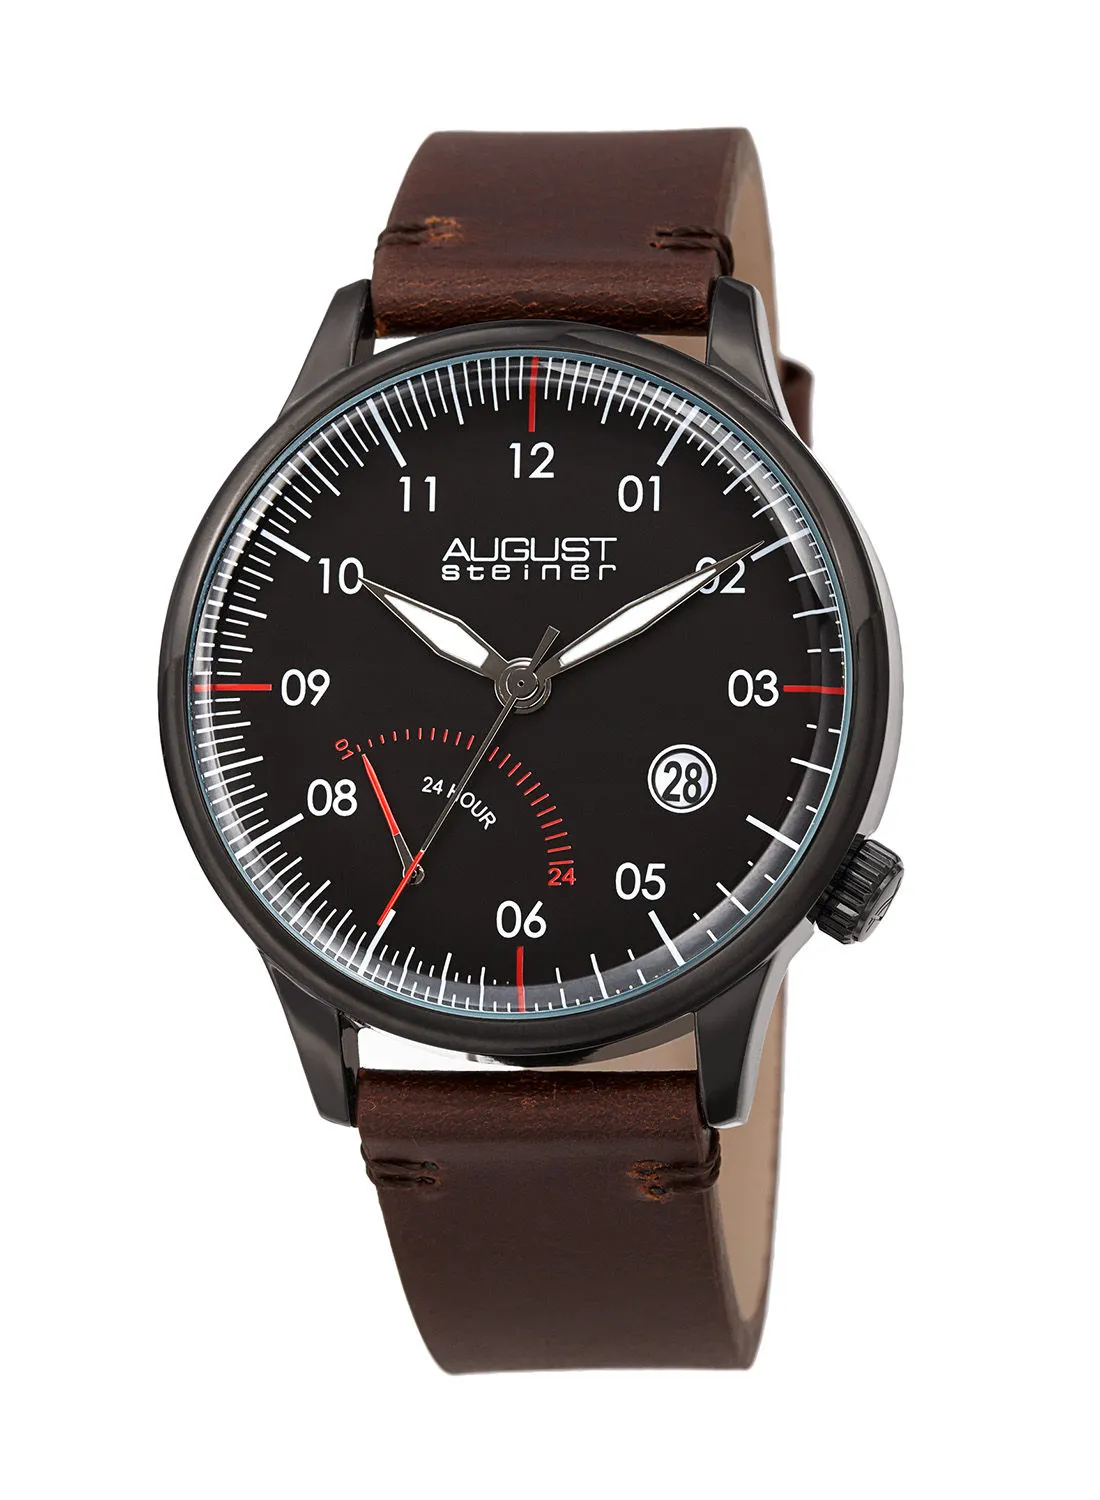 August Steiner Ion Plated Black Tone Case, Black Dial, on a Dark Brown Leather Strap with Stitched Corners